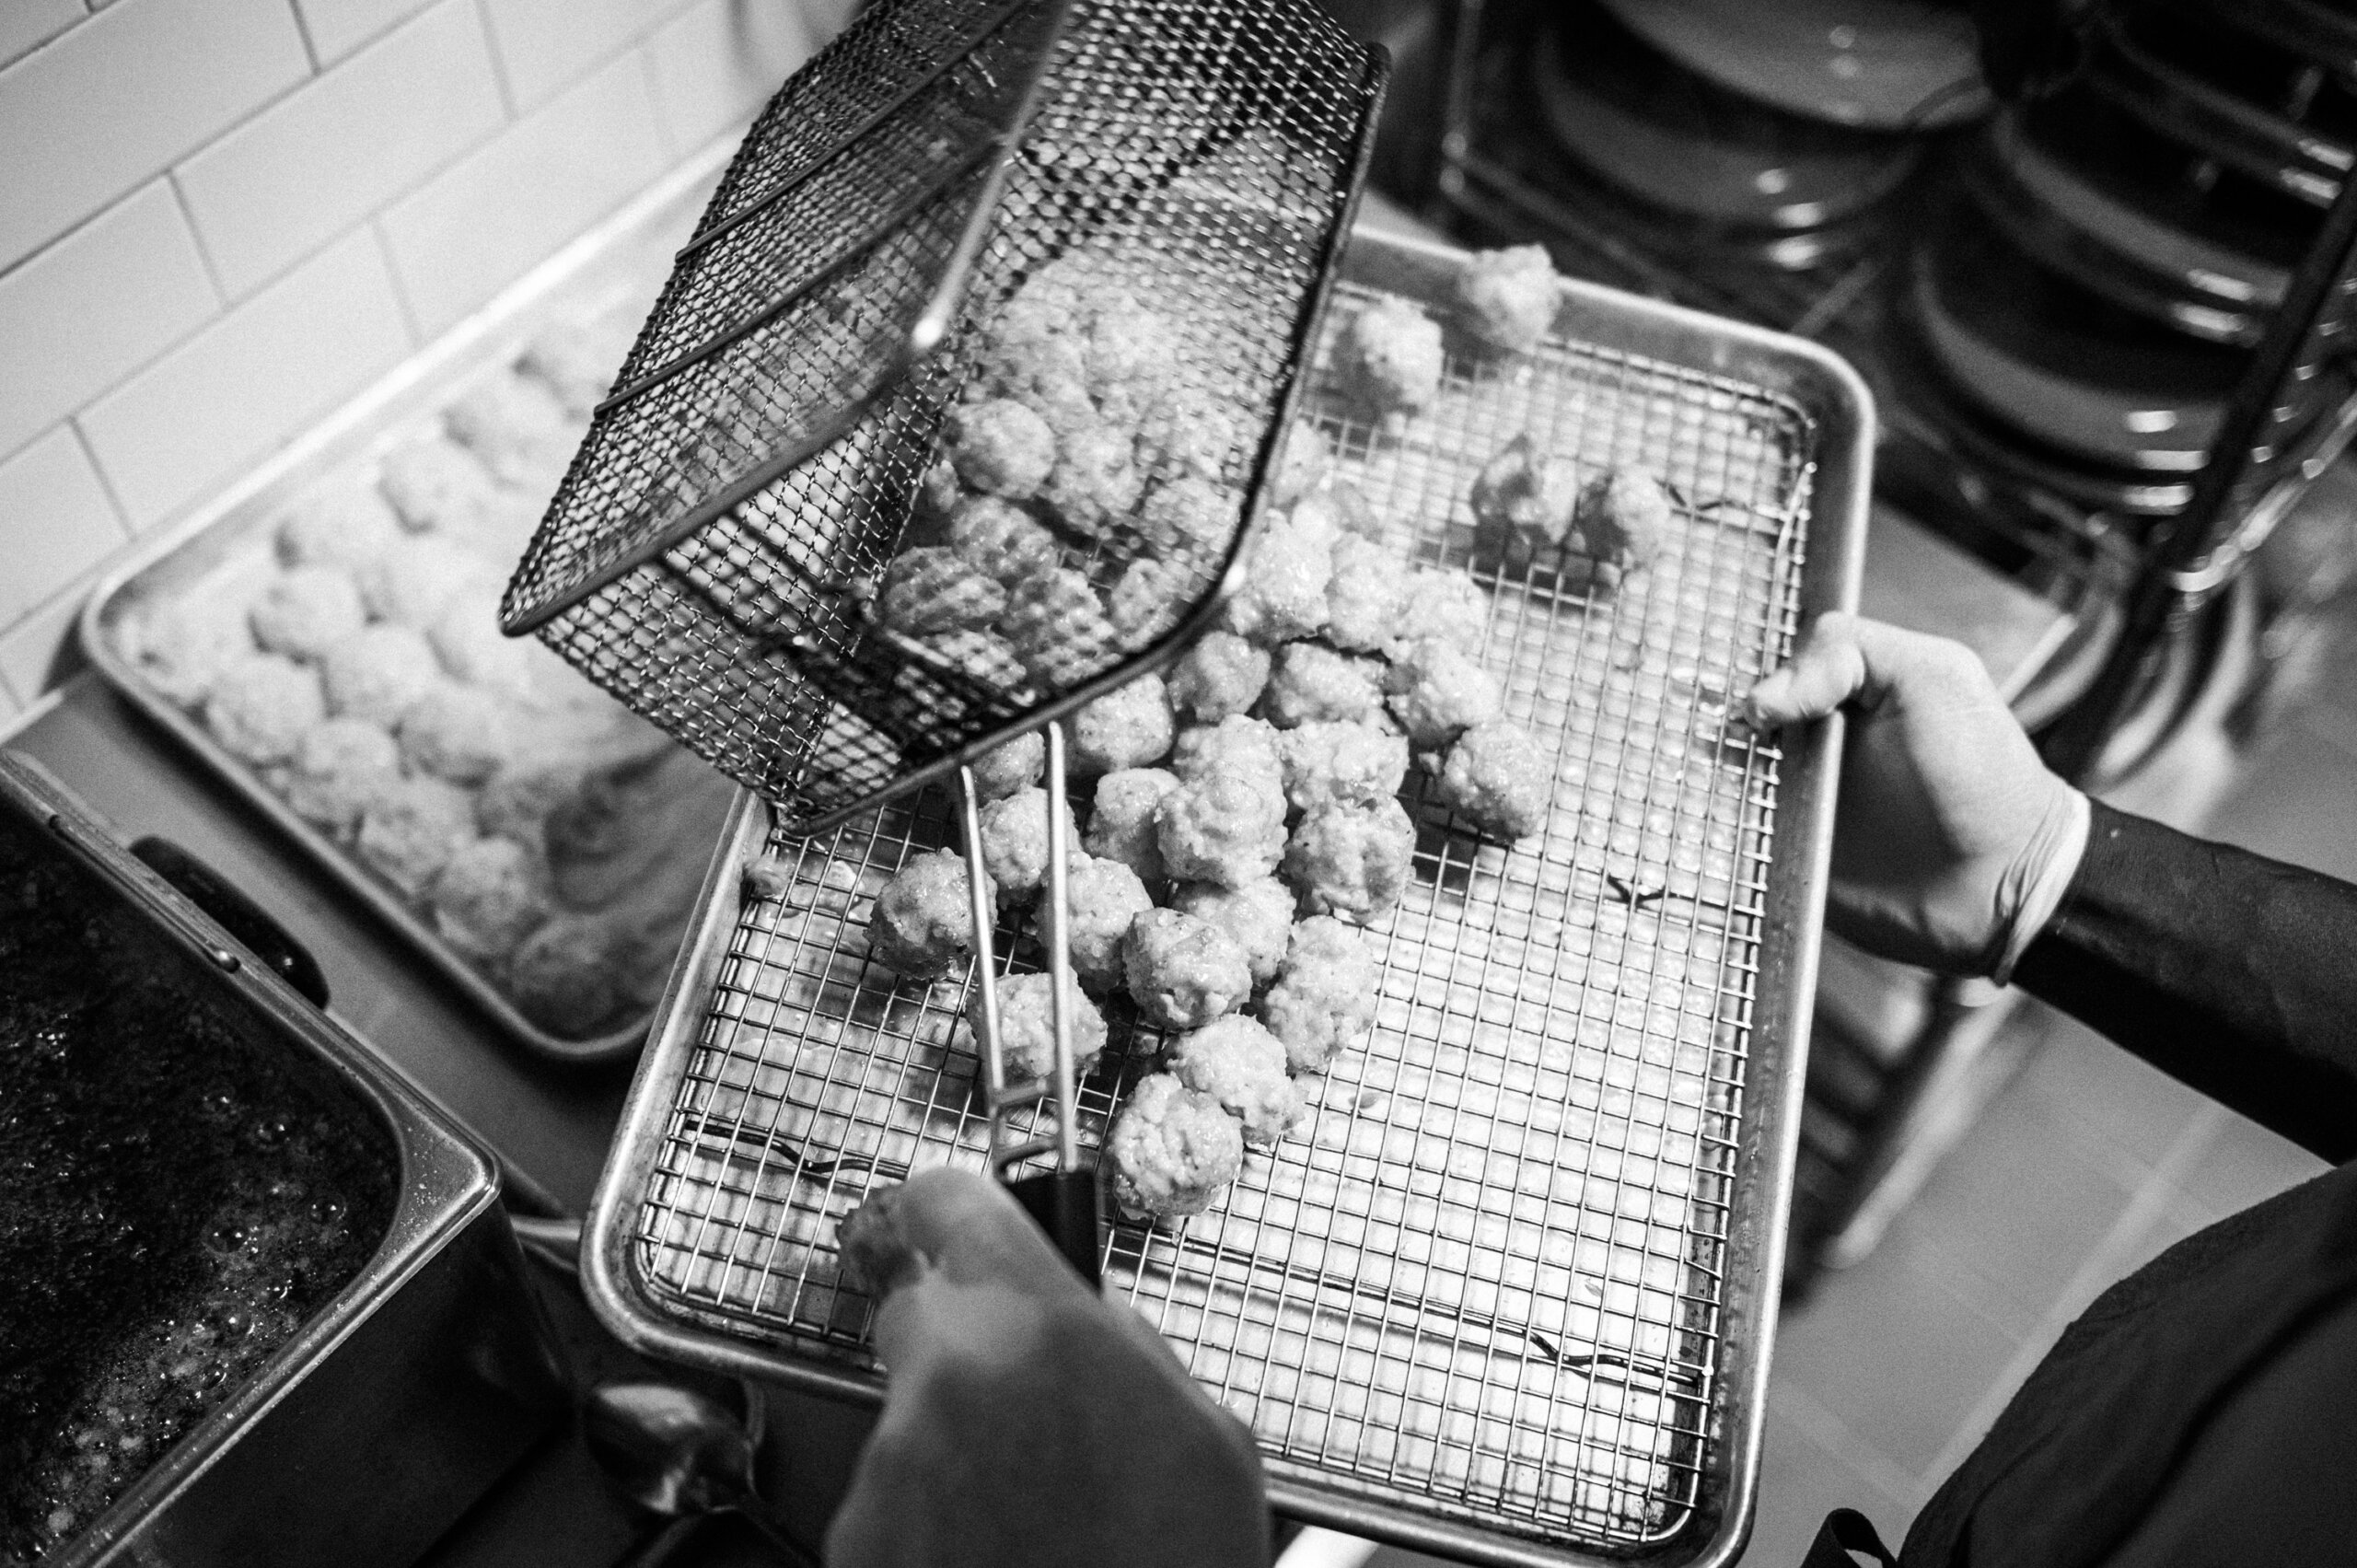 Fritters removed from the fryer before plating